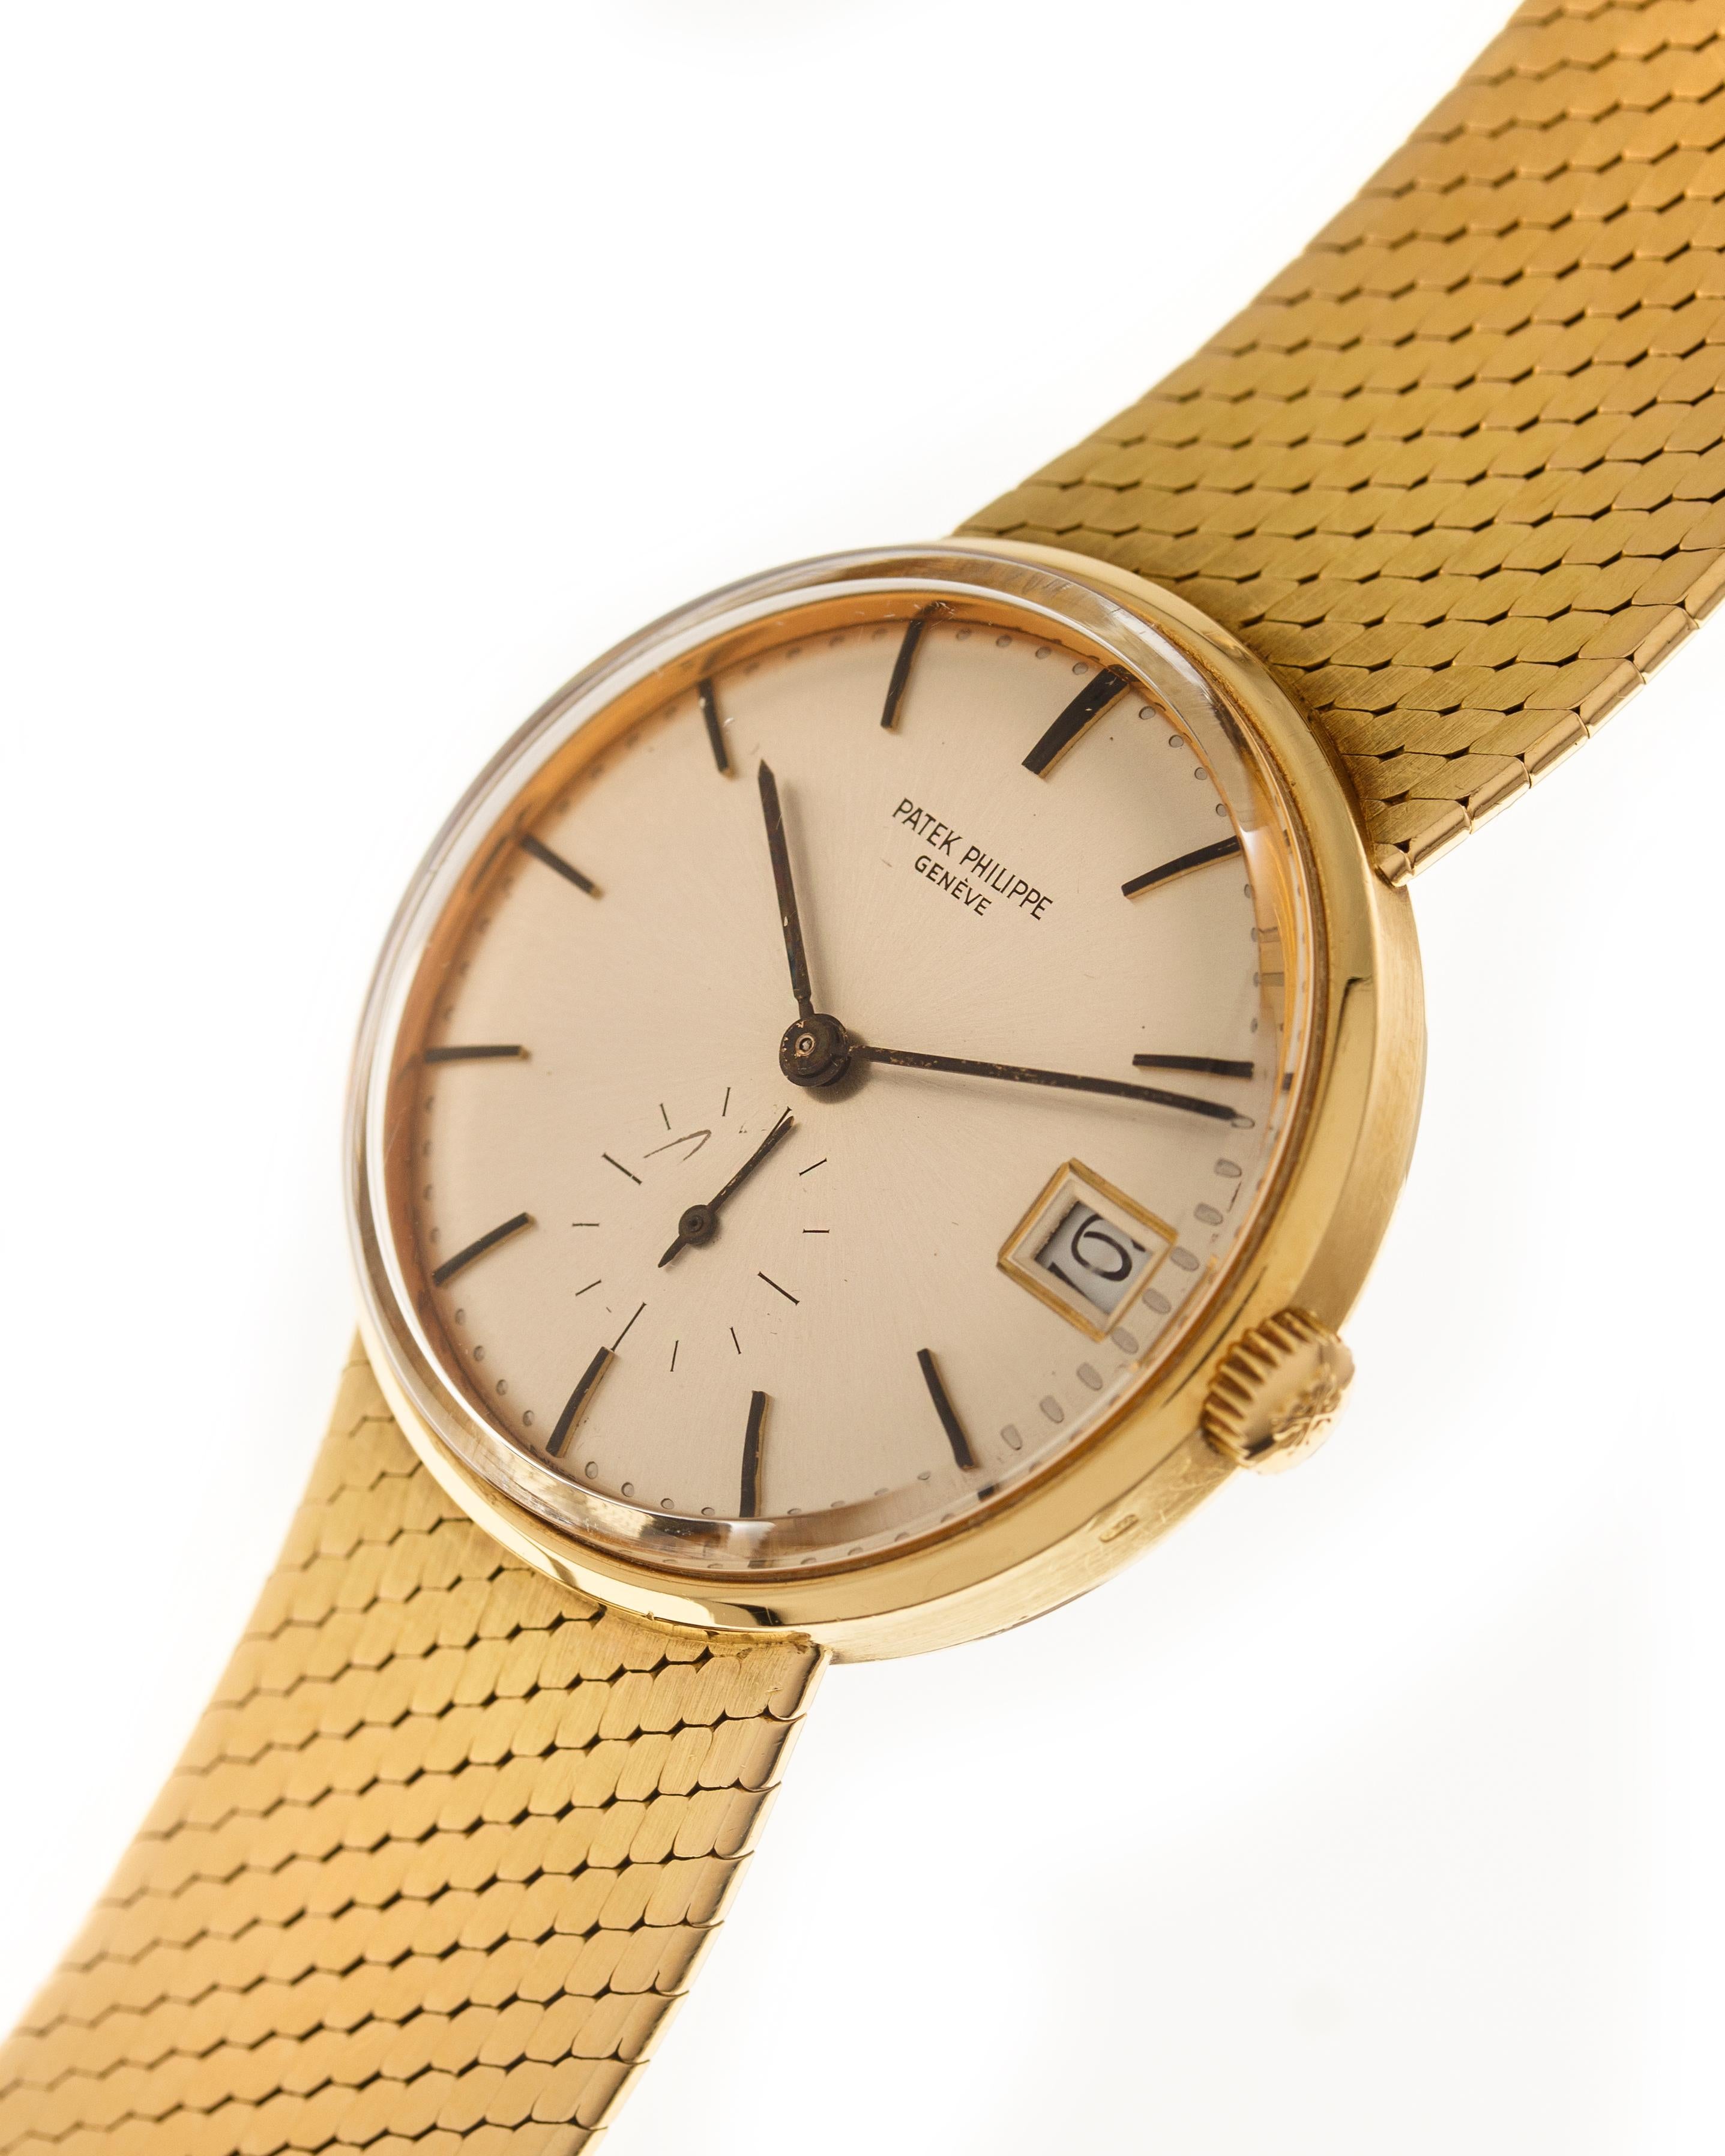 Patek Philippe Calatrava automatic ref. 3514/8 18 it's one of the first waterproof automatic date watches produced by Patek Philippe, bearing a suede-feel integrated bracelet.

Case: 34 mm in 18 kt yellow gold water resistant circular case in three